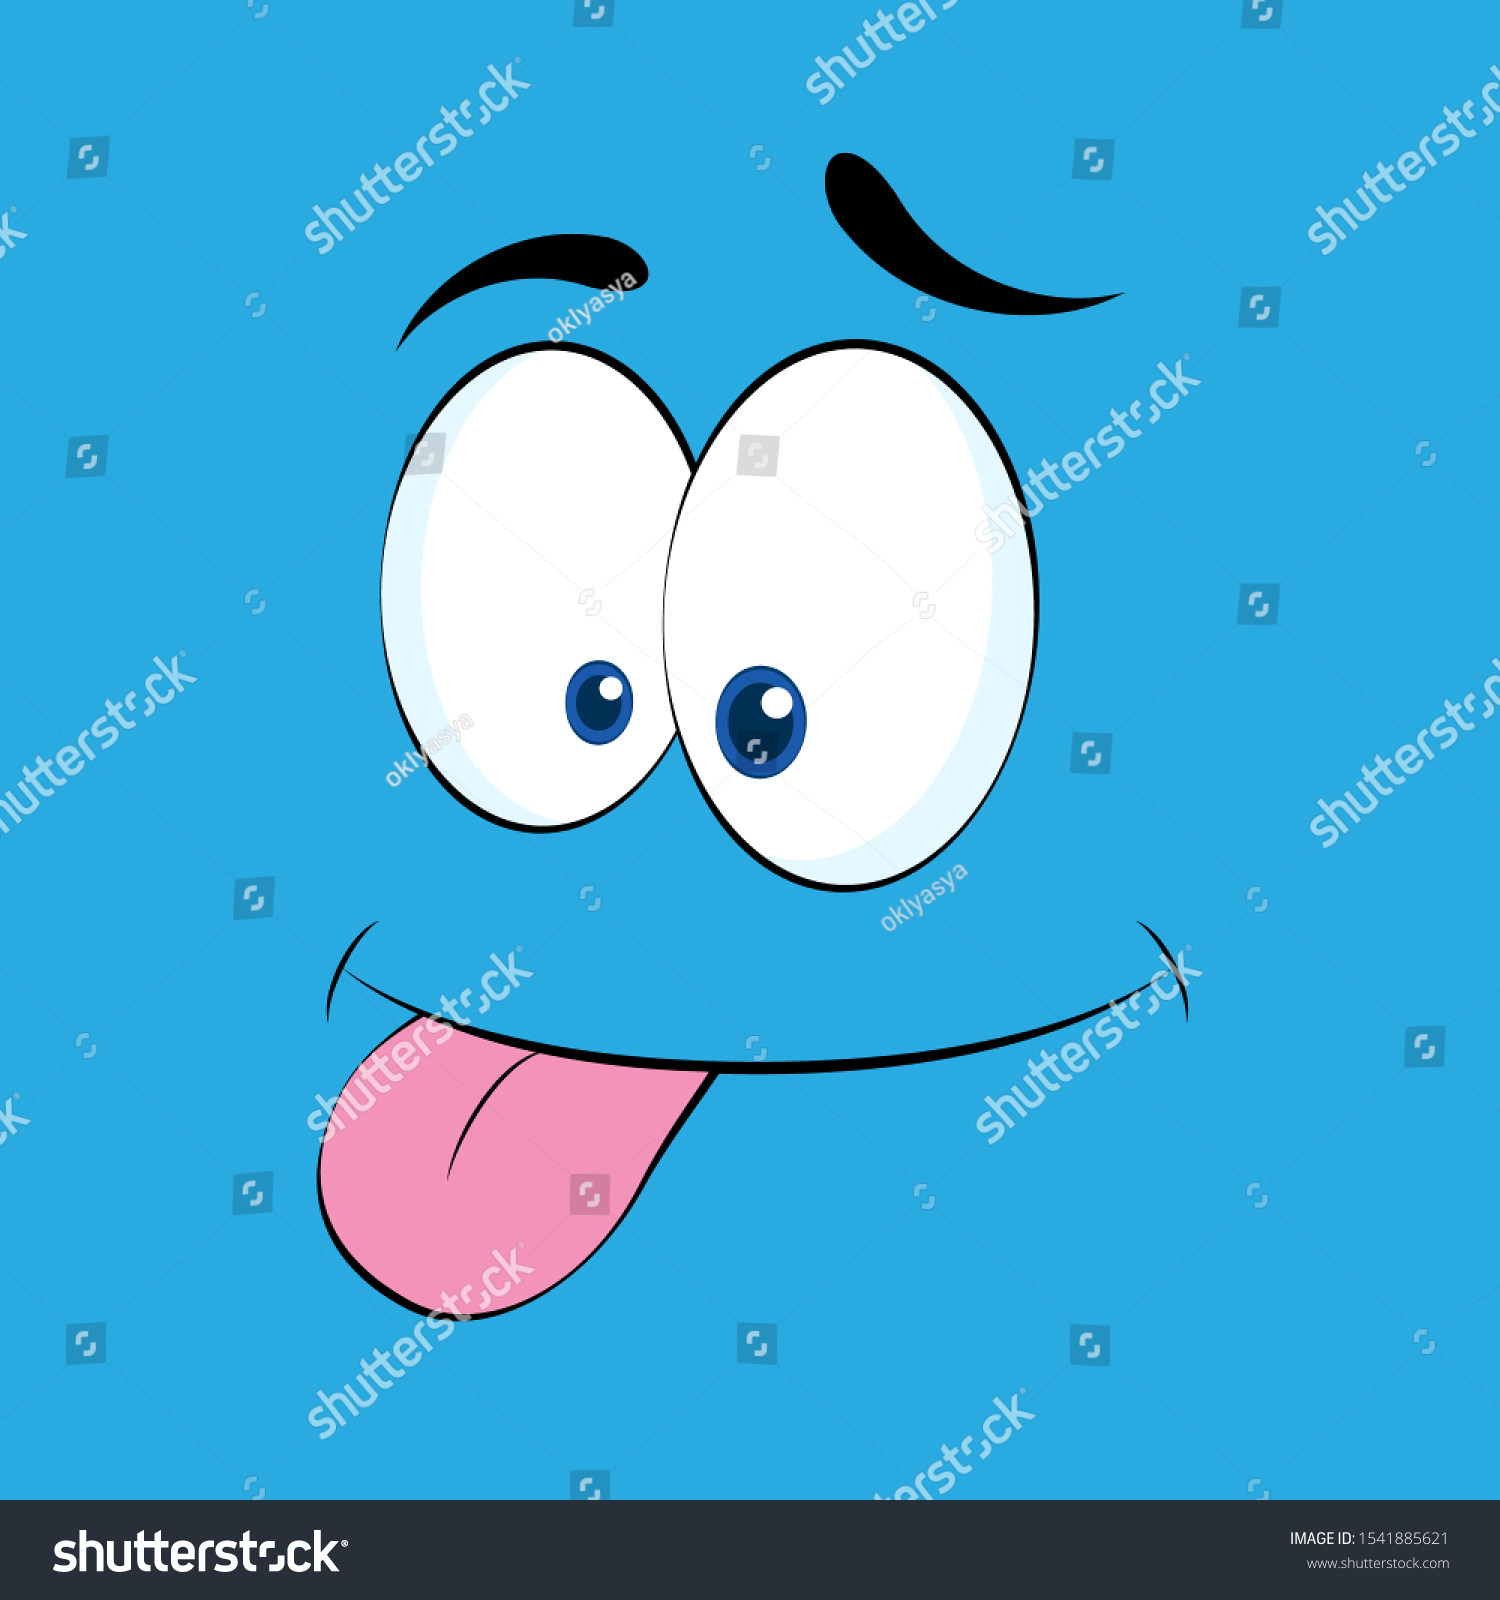 Smiling Cartoon Funny Face Smiley Expression Stock Vector Royalty Free 1541885621 Shutterstock